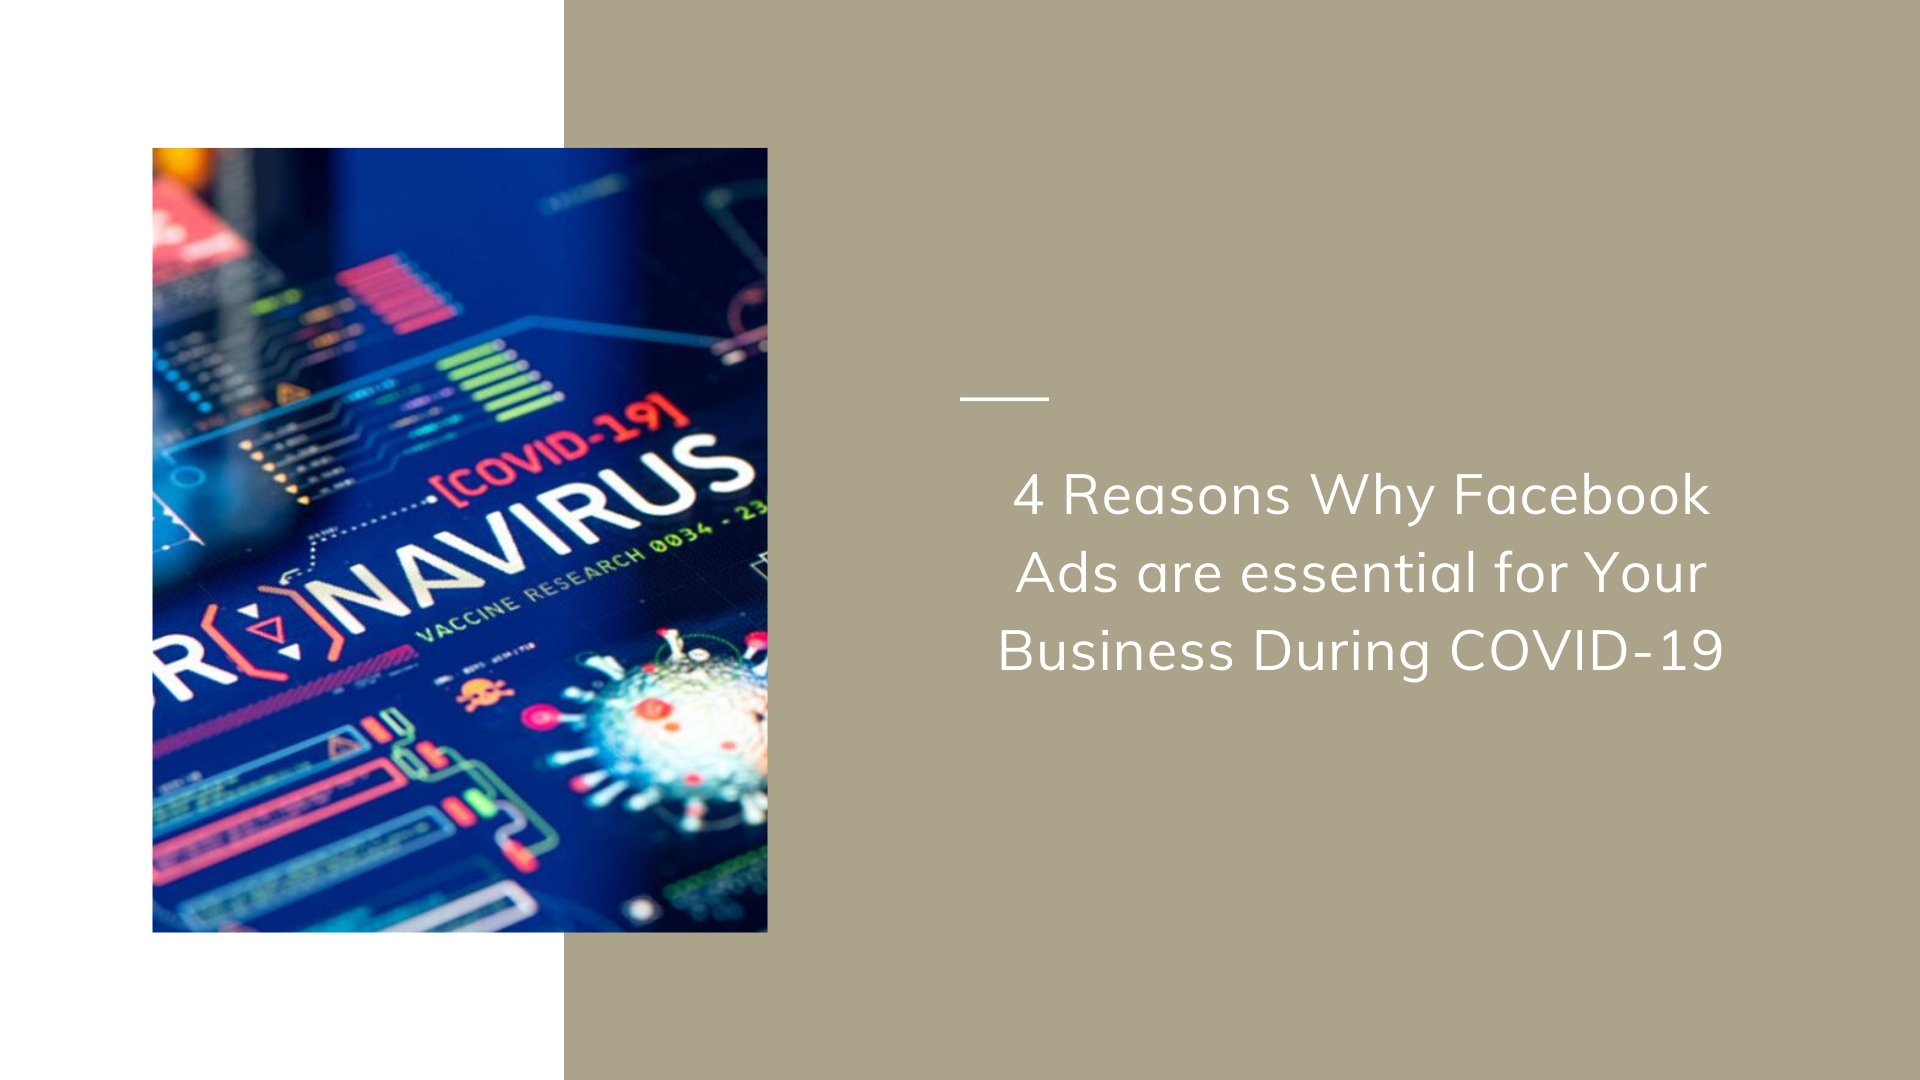 4 Reasons Why Facebook Ads are essential for Your Business During COVID-19